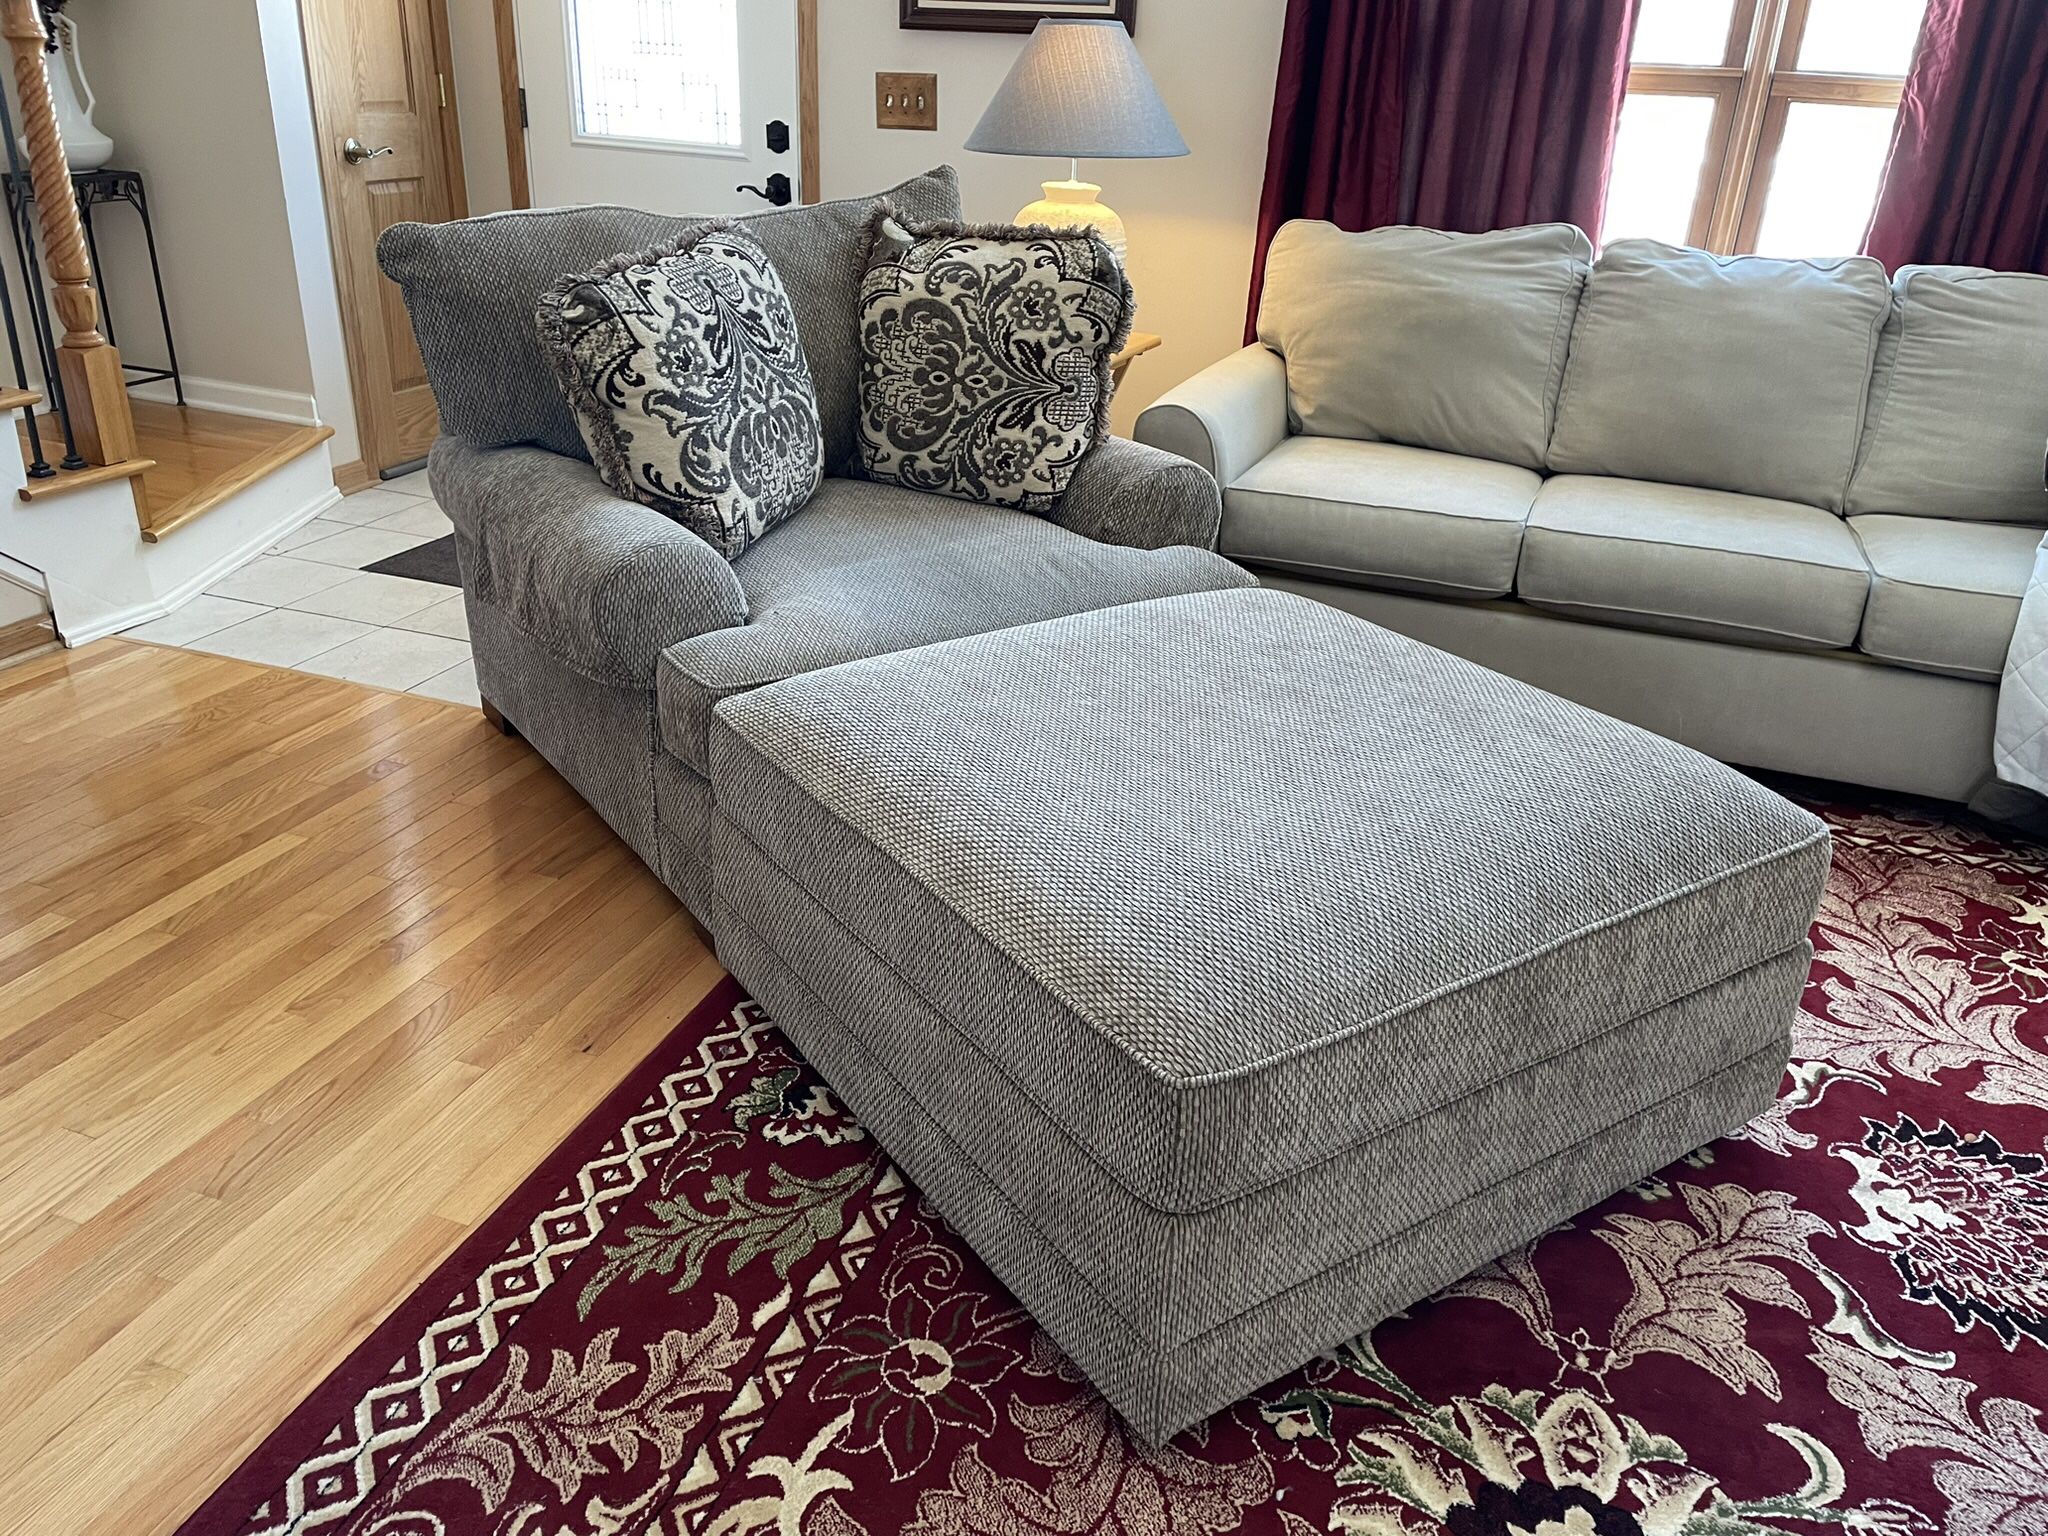 Living Room Chair With Ottoman And Pillows